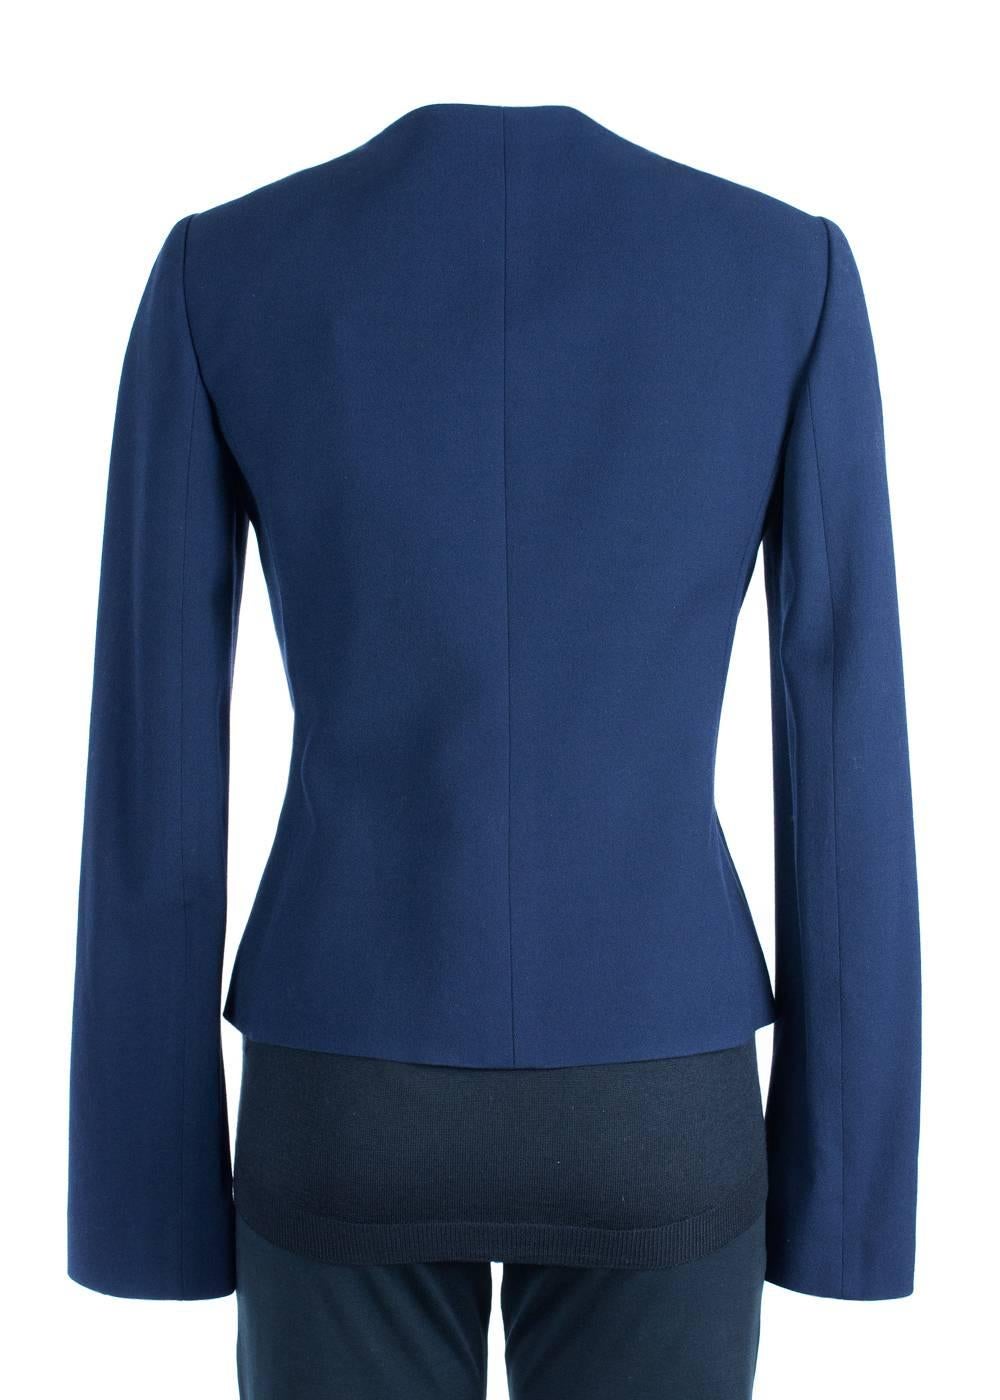 Purple Valentino Women's Navy Lace Accented Snap Jacket For Sale